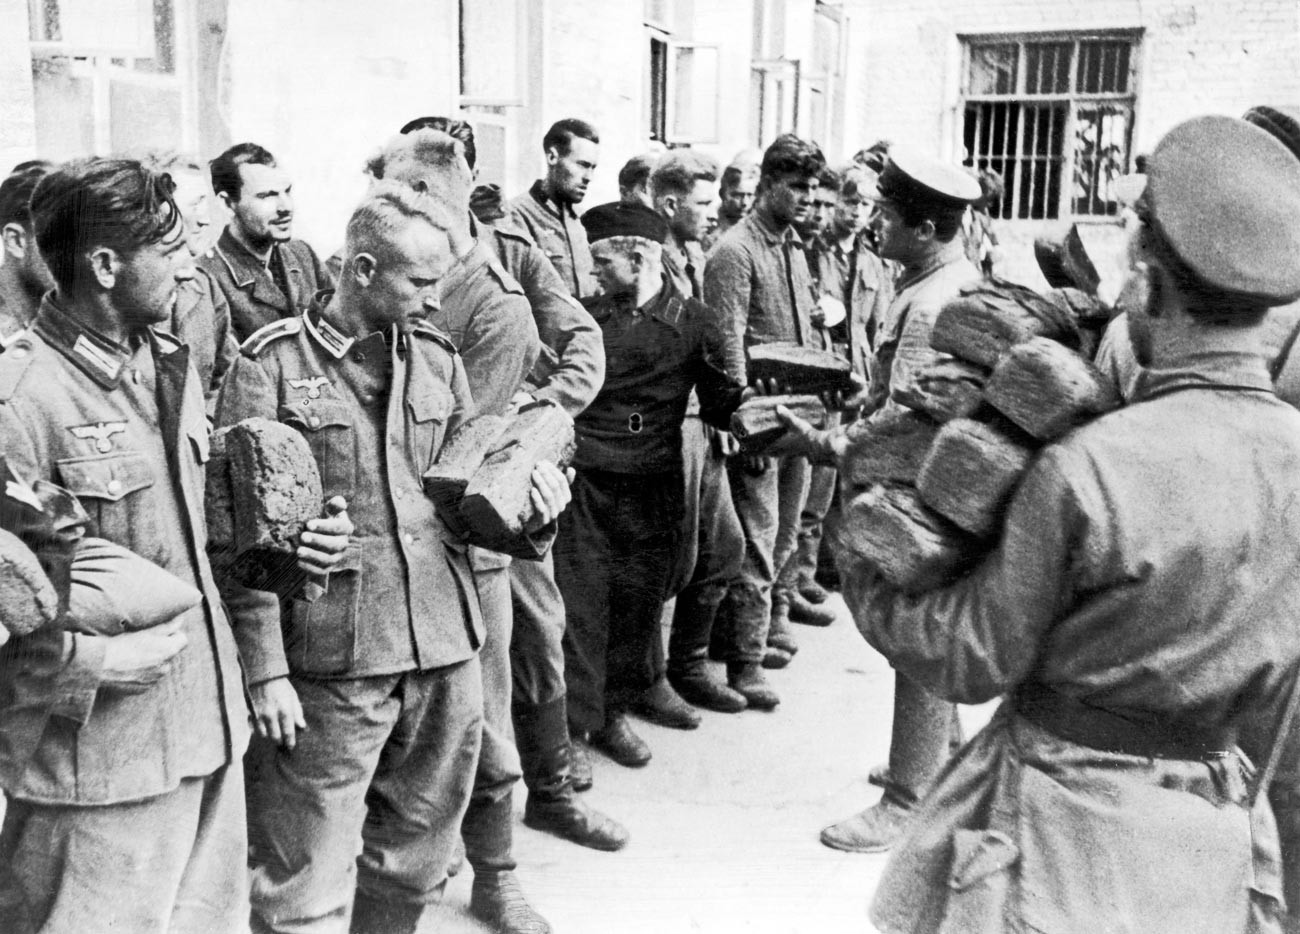 German prisoners of war captured by Russian forces are fed bread by the Russian soldiers during the Second World War. 9th August 1941.